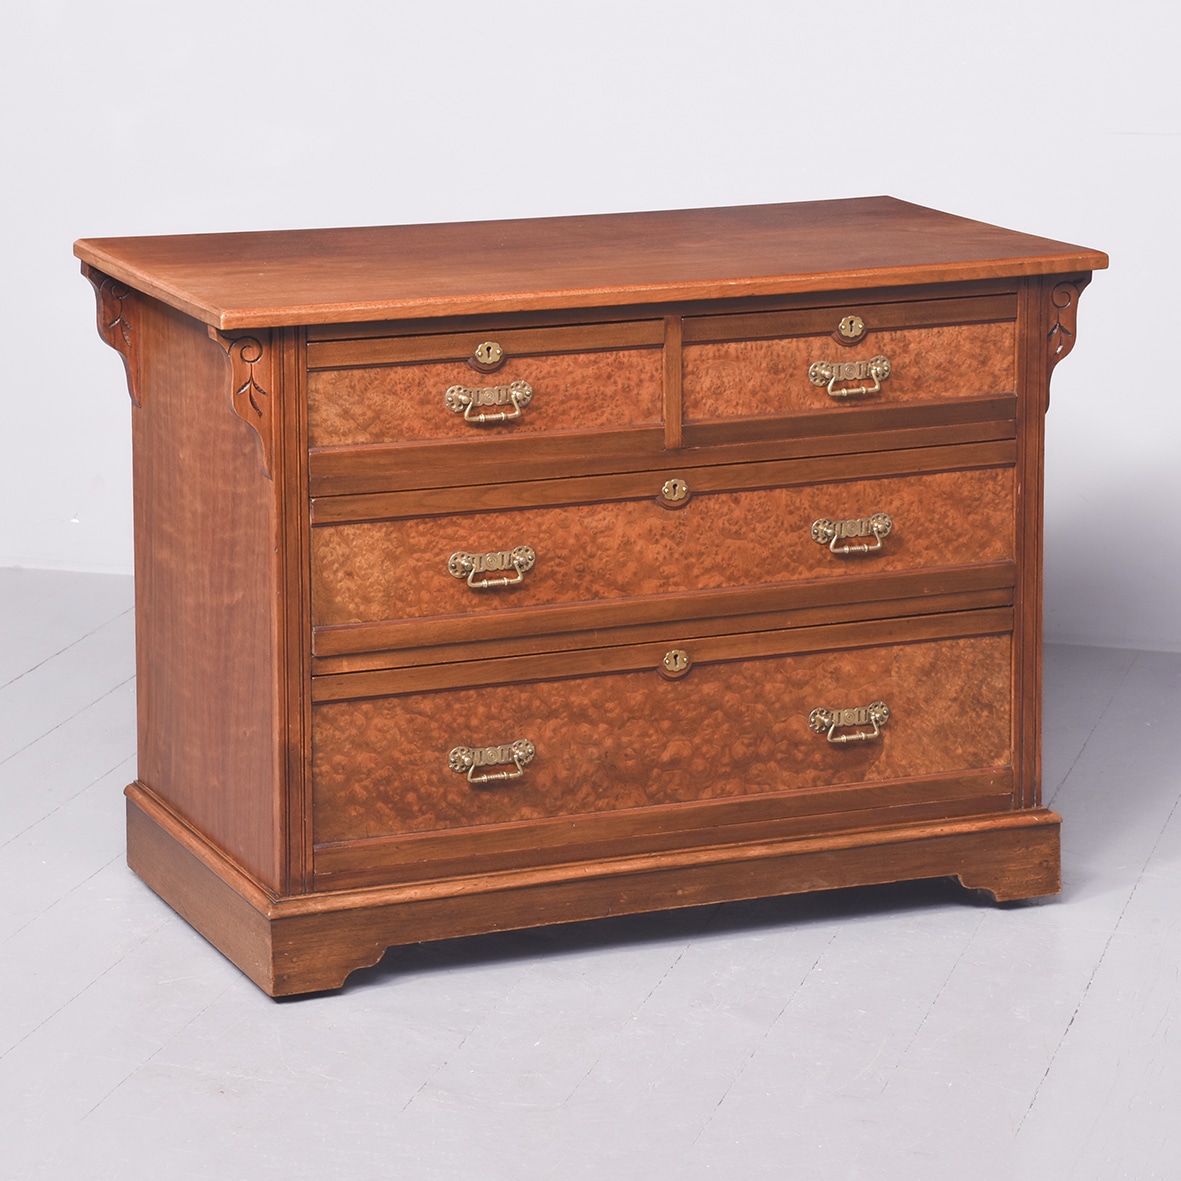 Unusual birds eye maple and walnut neat-sized Arts and Crafts chest of drawers Antique chest of drawers Scotland Antique Chest Of Drawers